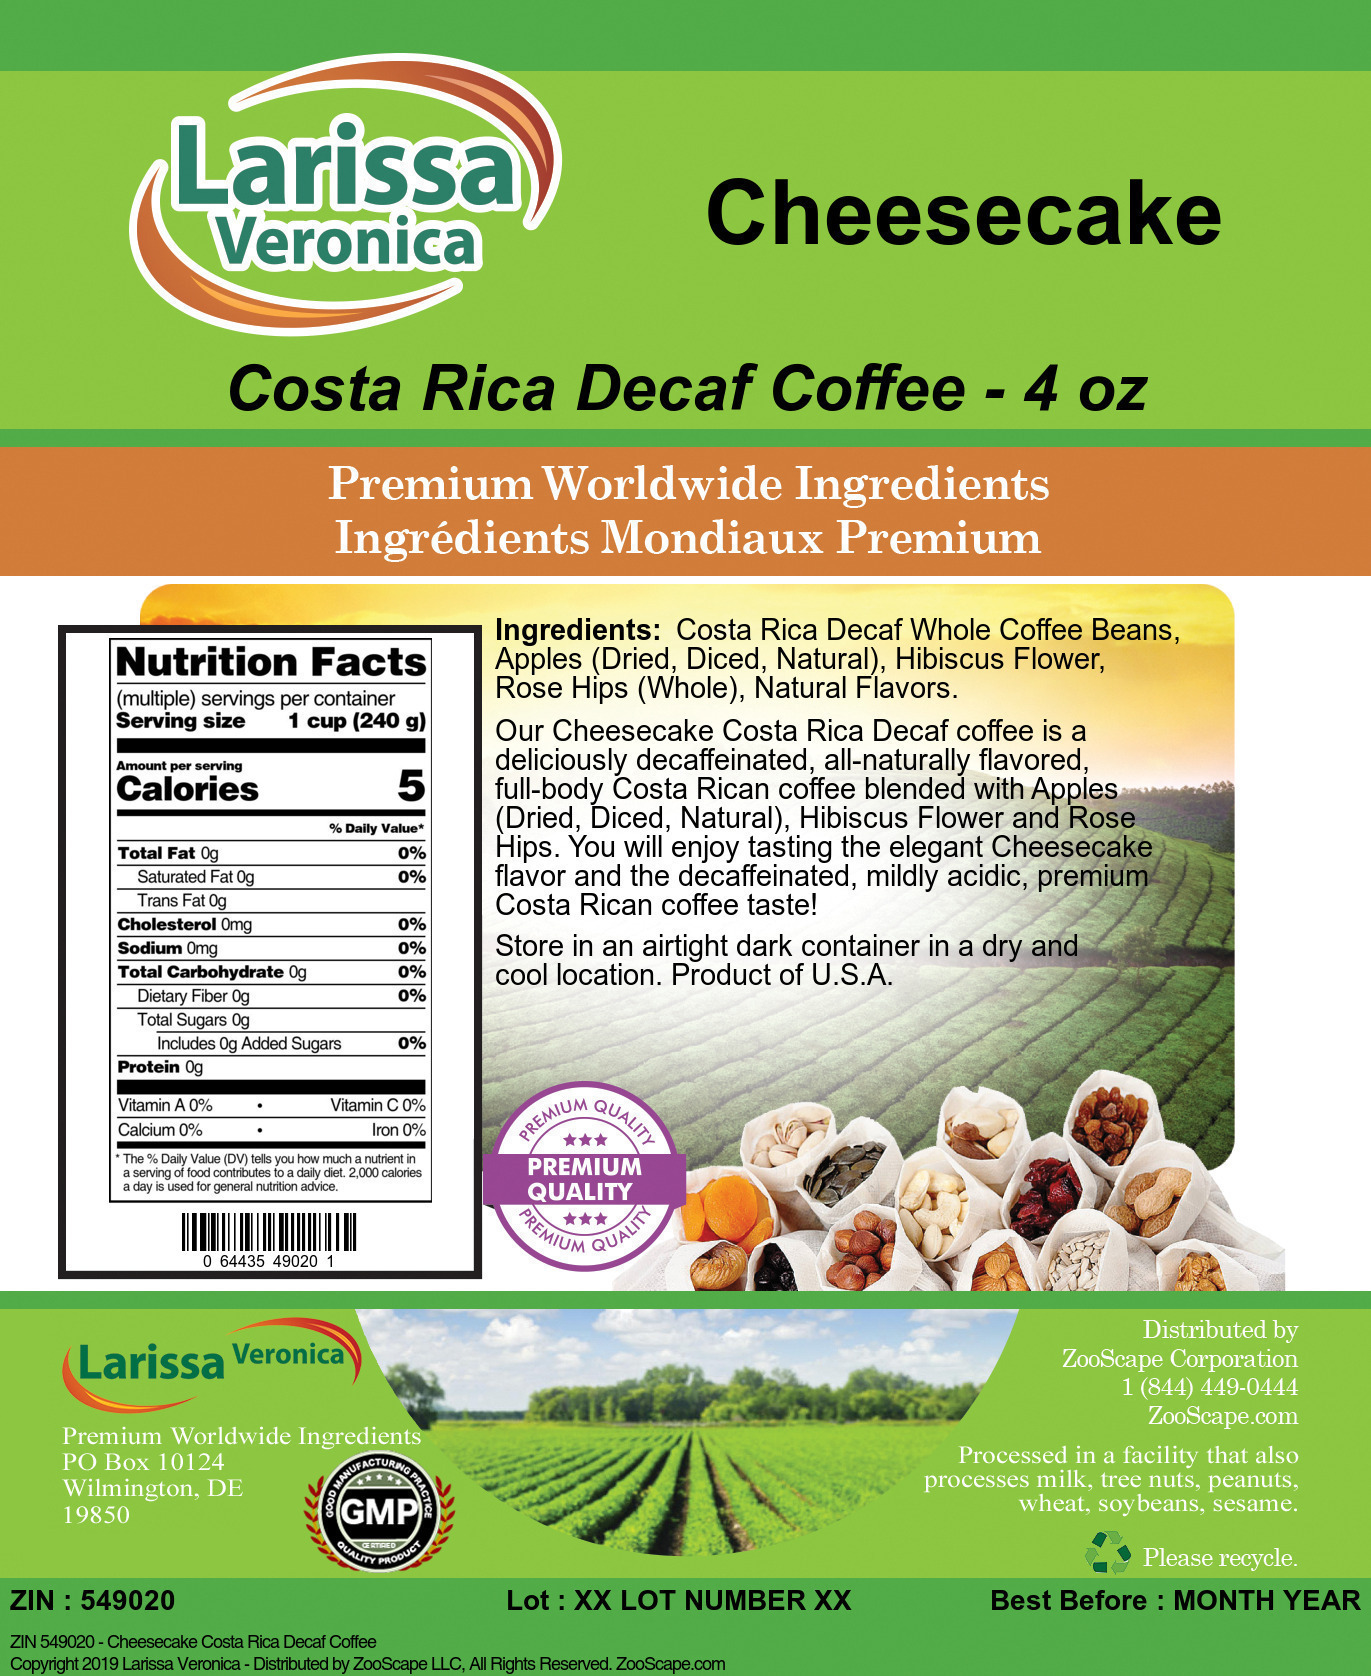 Cheesecake Costa Rica Decaf Coffee - Label